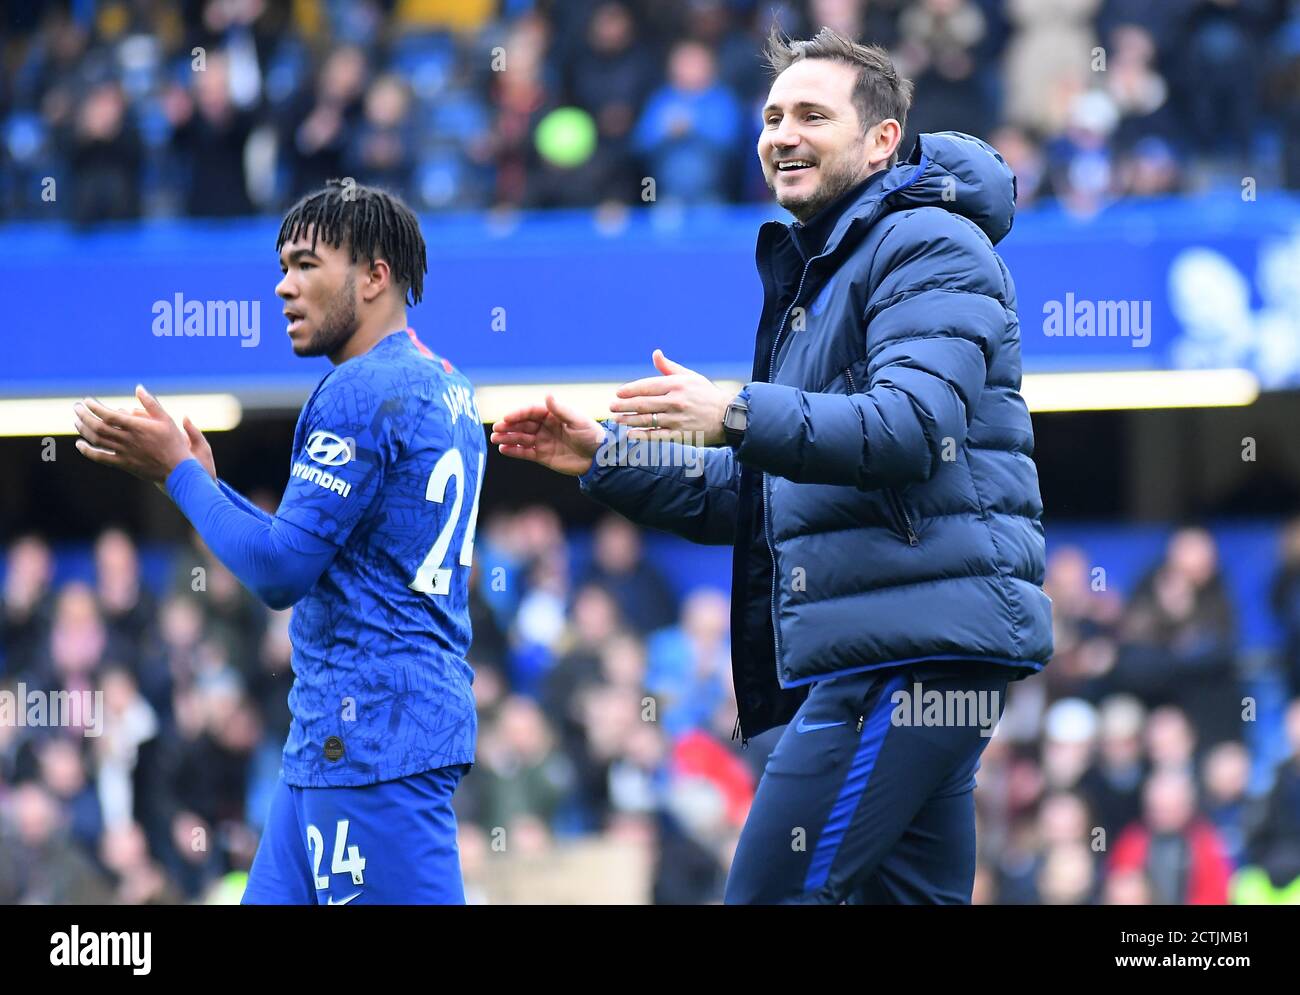 LONDON, ENGLAND - FEBRUARY 22, 2020: Reece James of Chelsea andChelsea manager Frank Lampard pictured after the 2019/20 Premier League game between Chelsea FC and Tottenham Hotspur FC at Stamford Bridge. Stock Photo